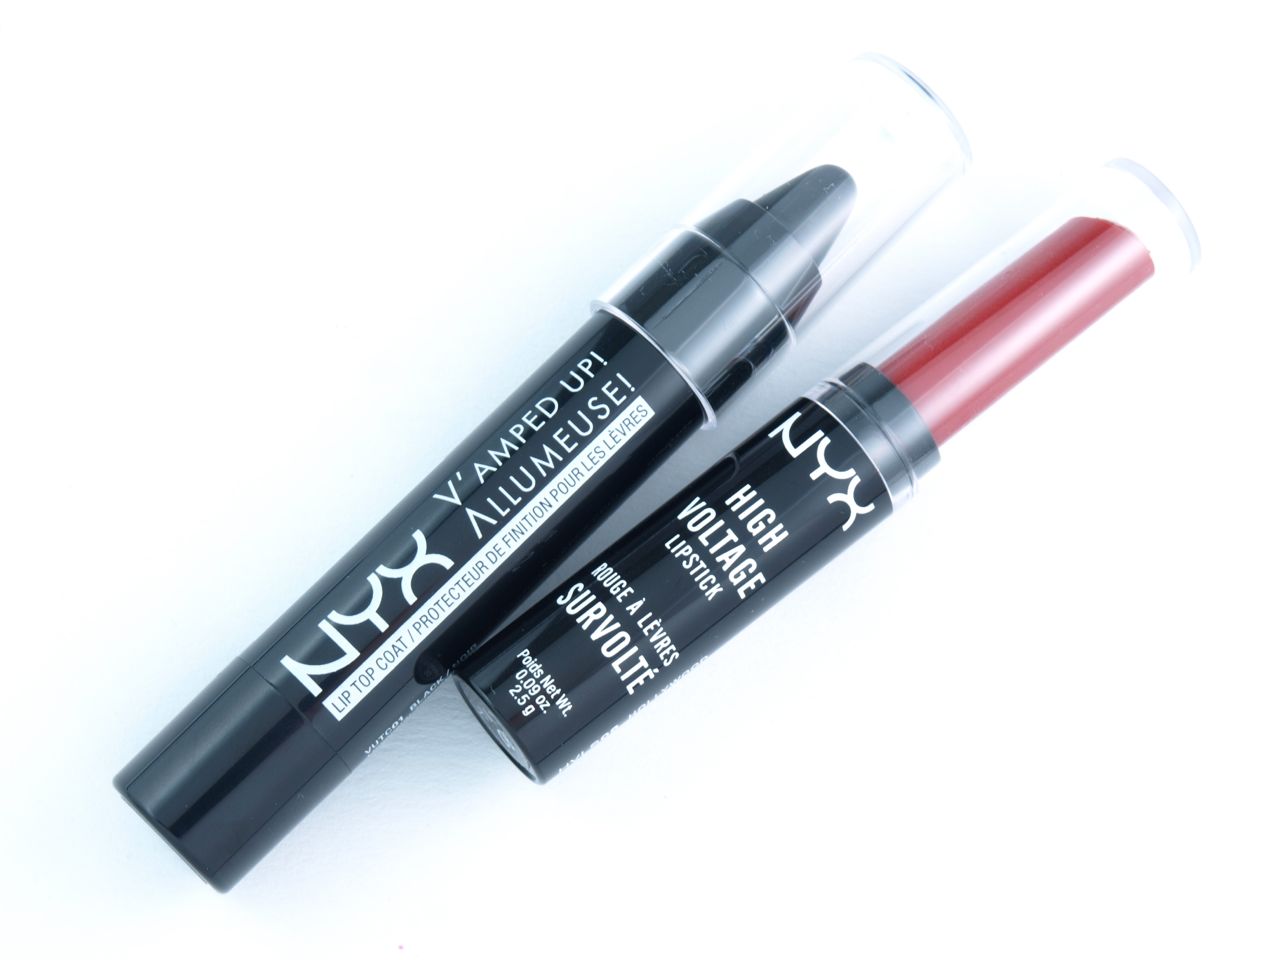 NYX High Voltage Lipstick in "06 Hollywood" & V'amped Up! Lip Top Coat: Review and Swatches